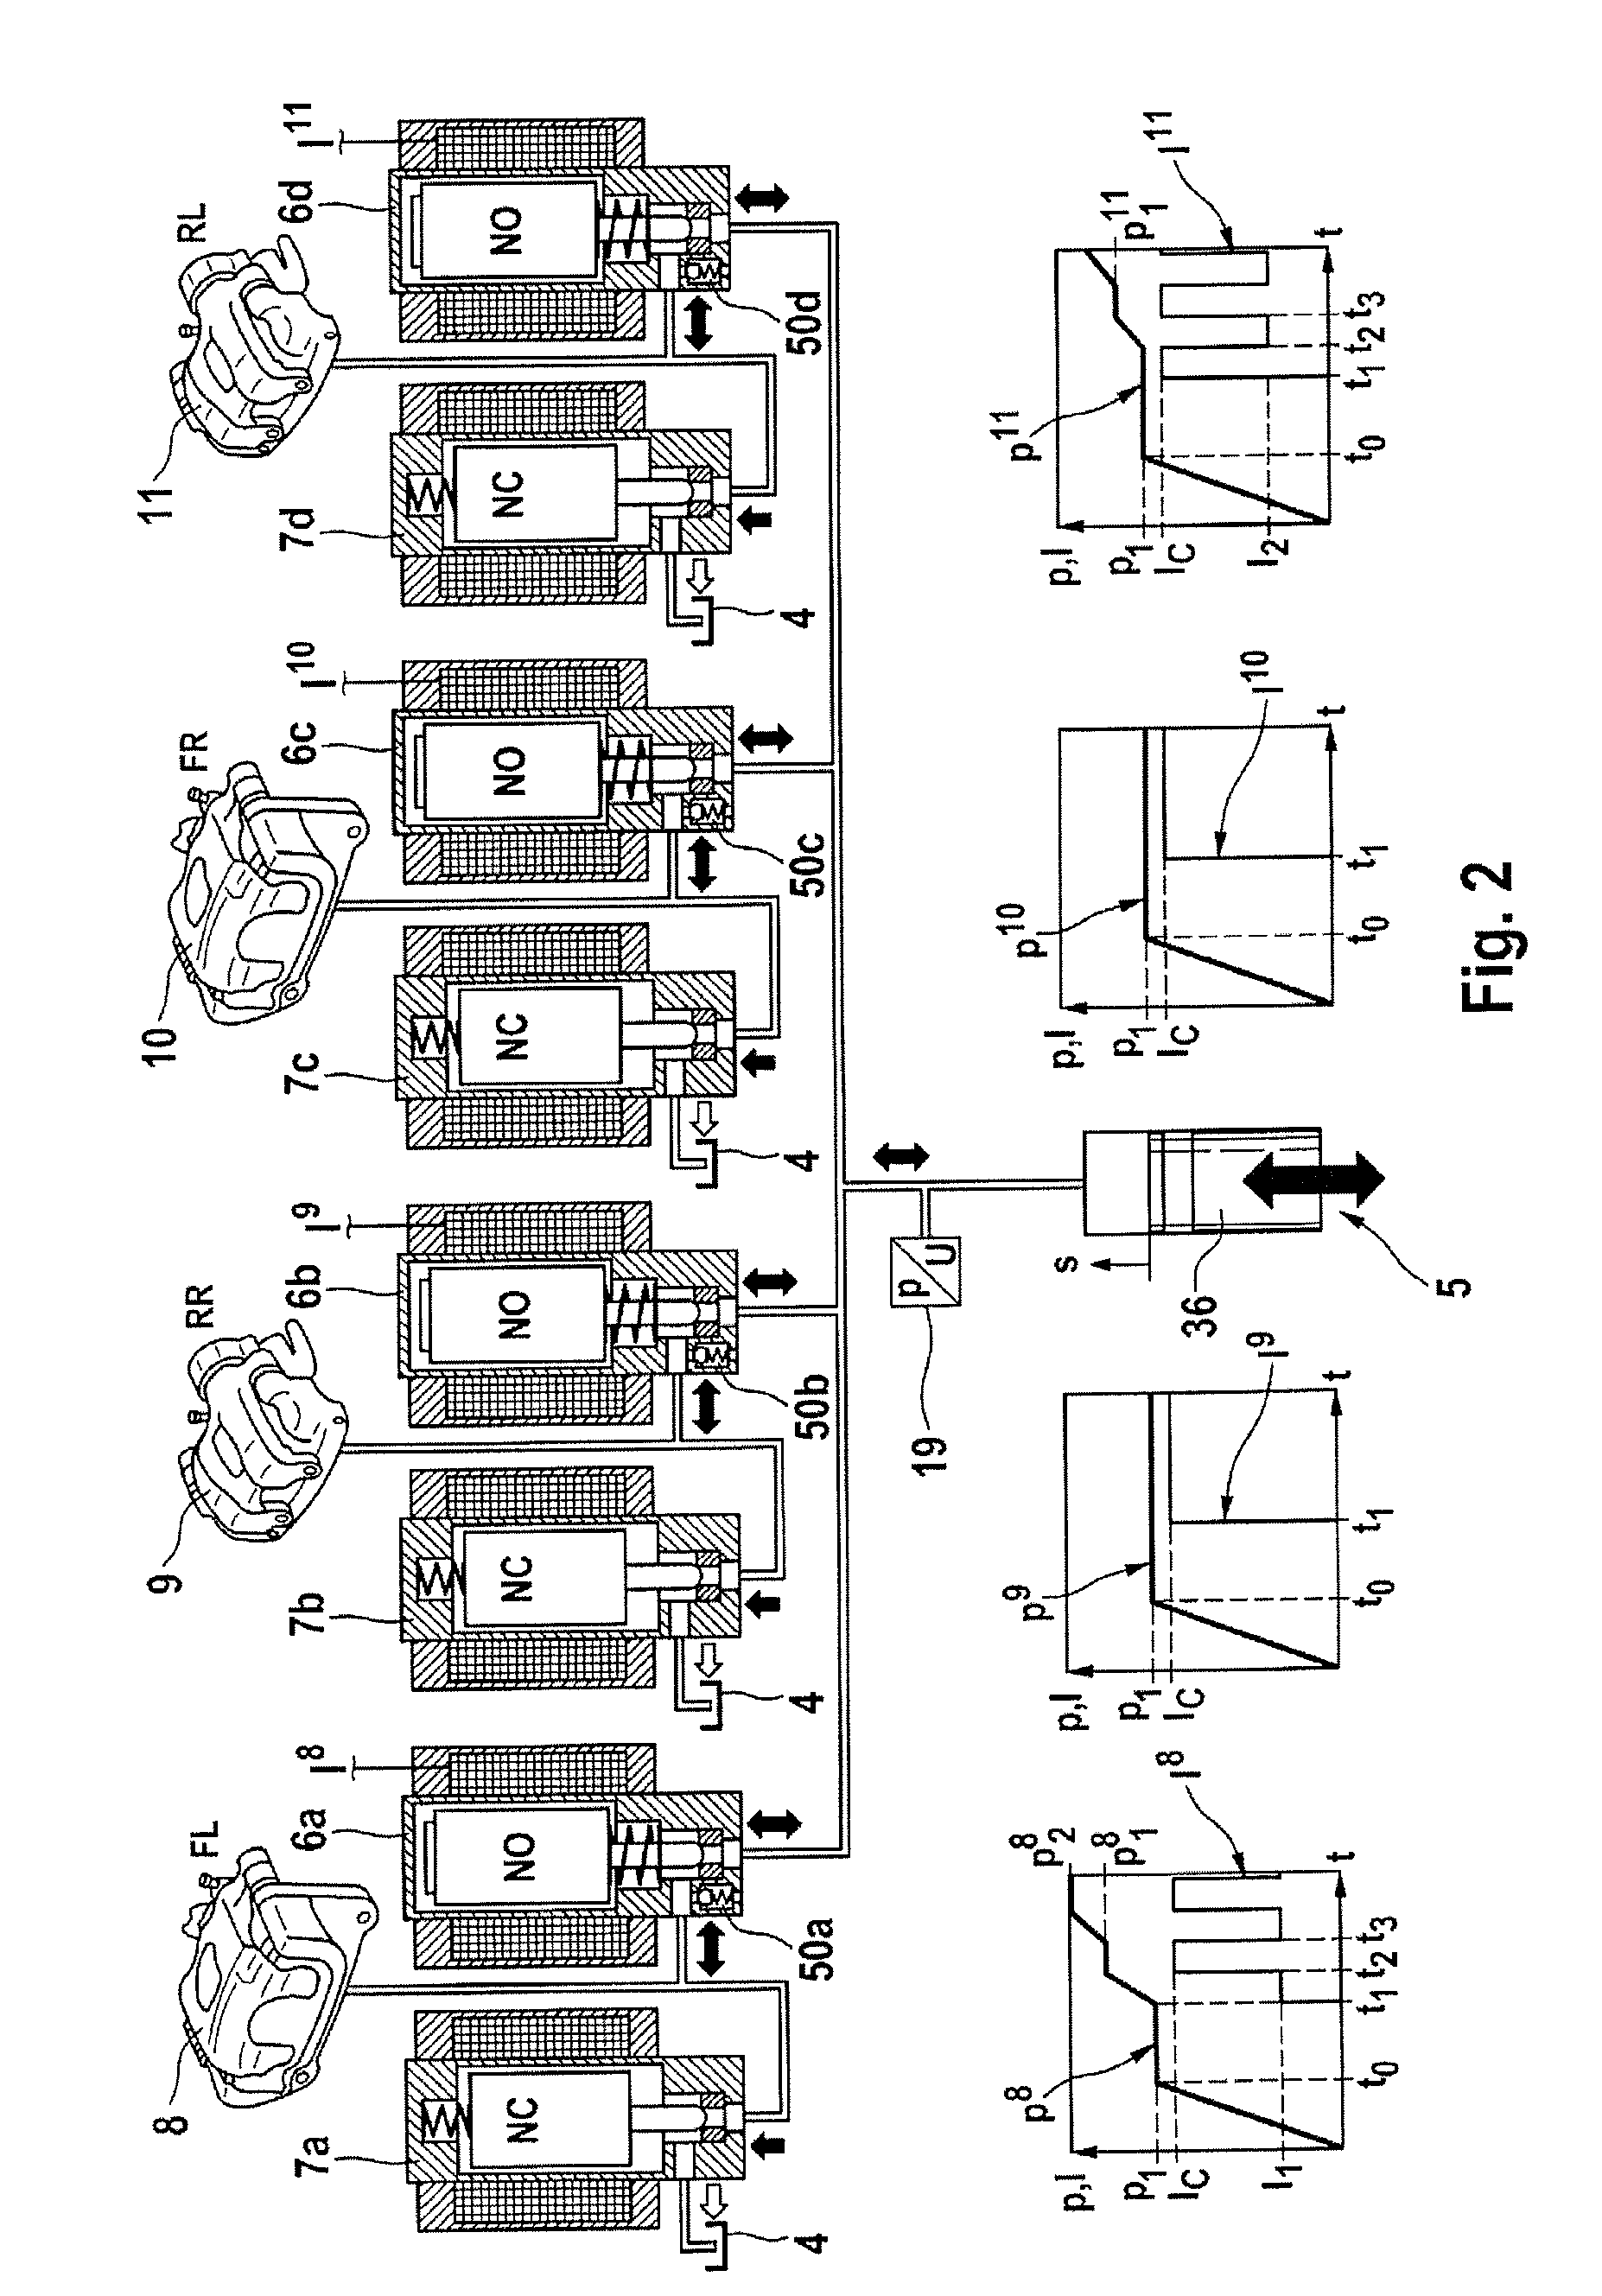 Method for operating a brake system for motor vehicles, and brake system